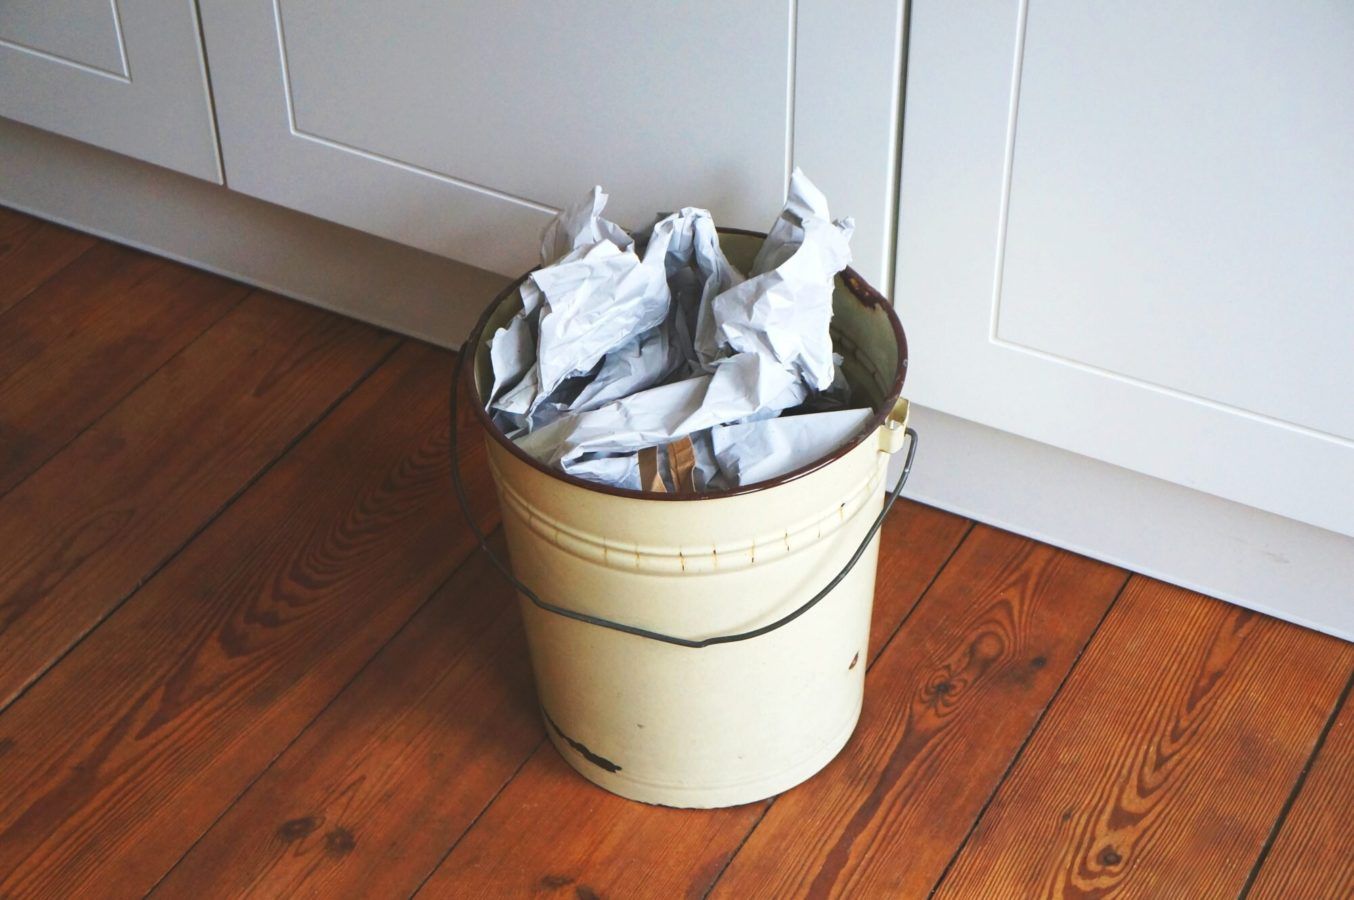 Let go of these eight household items as we start the New Year